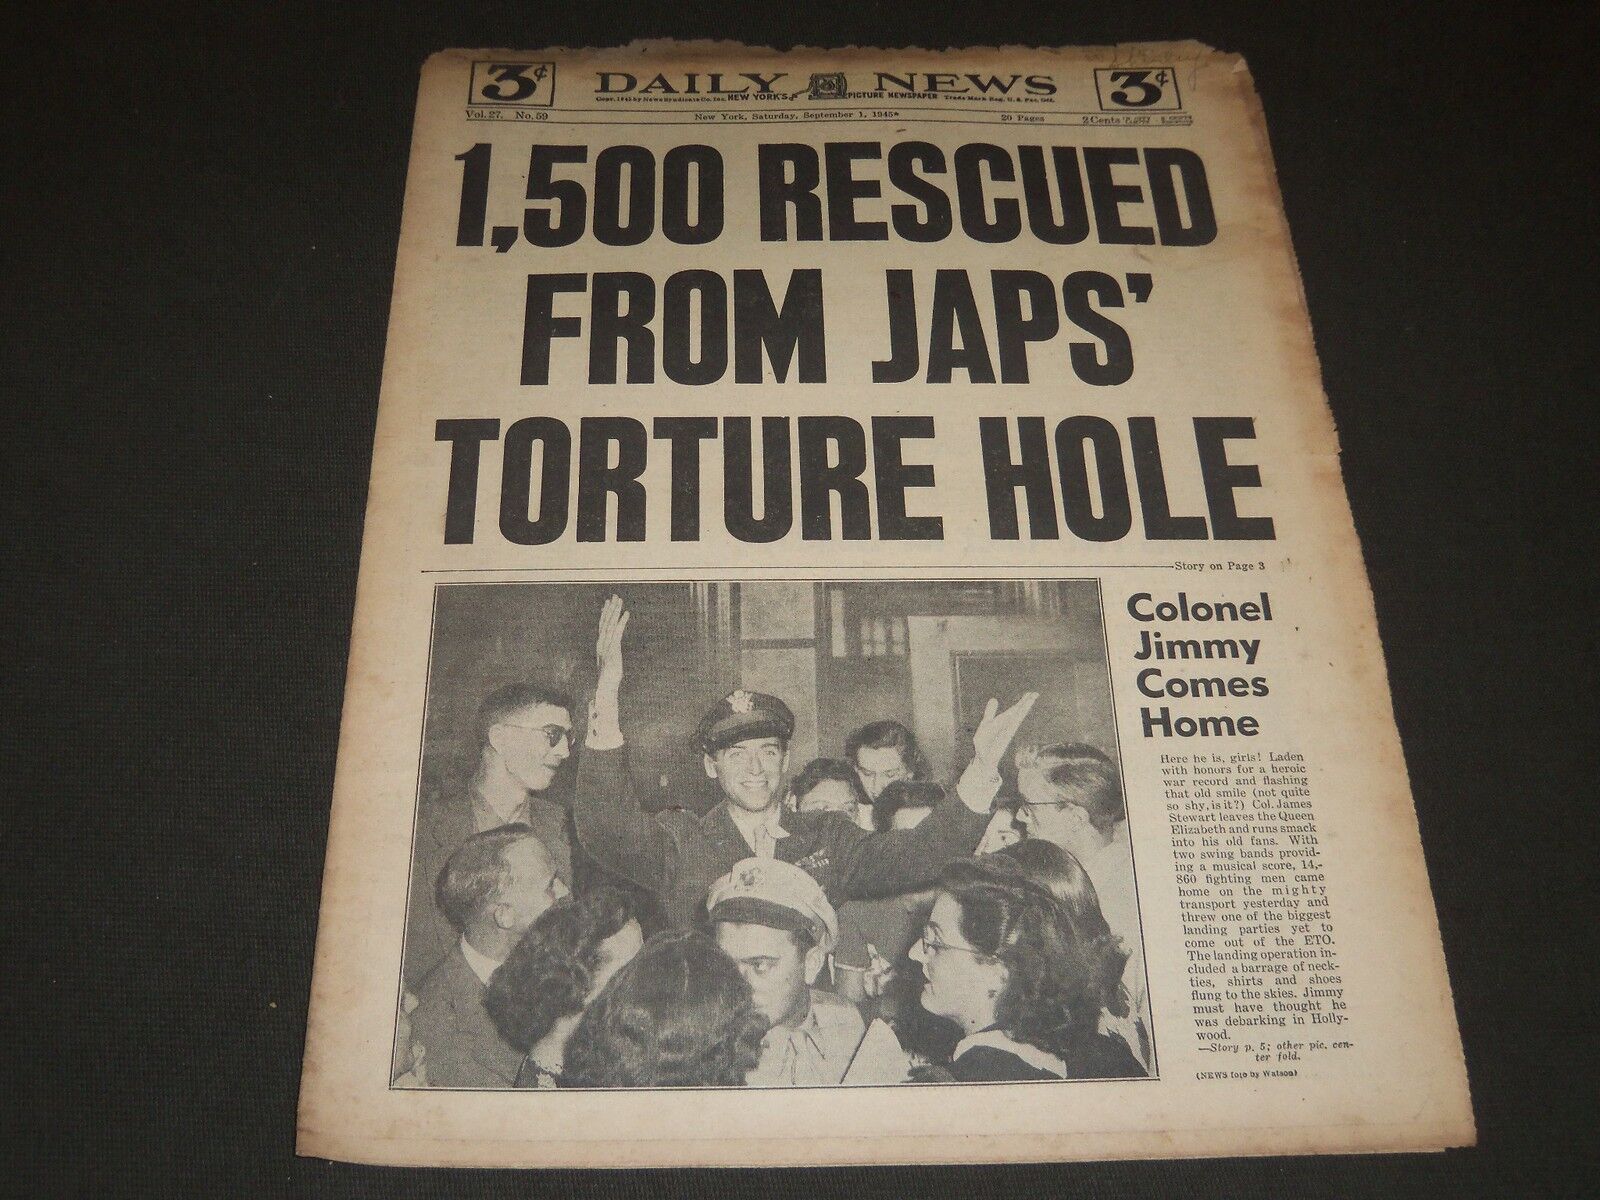 1945 SEPT 1 NEW YORK DAILY NEWS - 1500 RESCUED FROM JAPS TORTURE HOLE - NP 2066